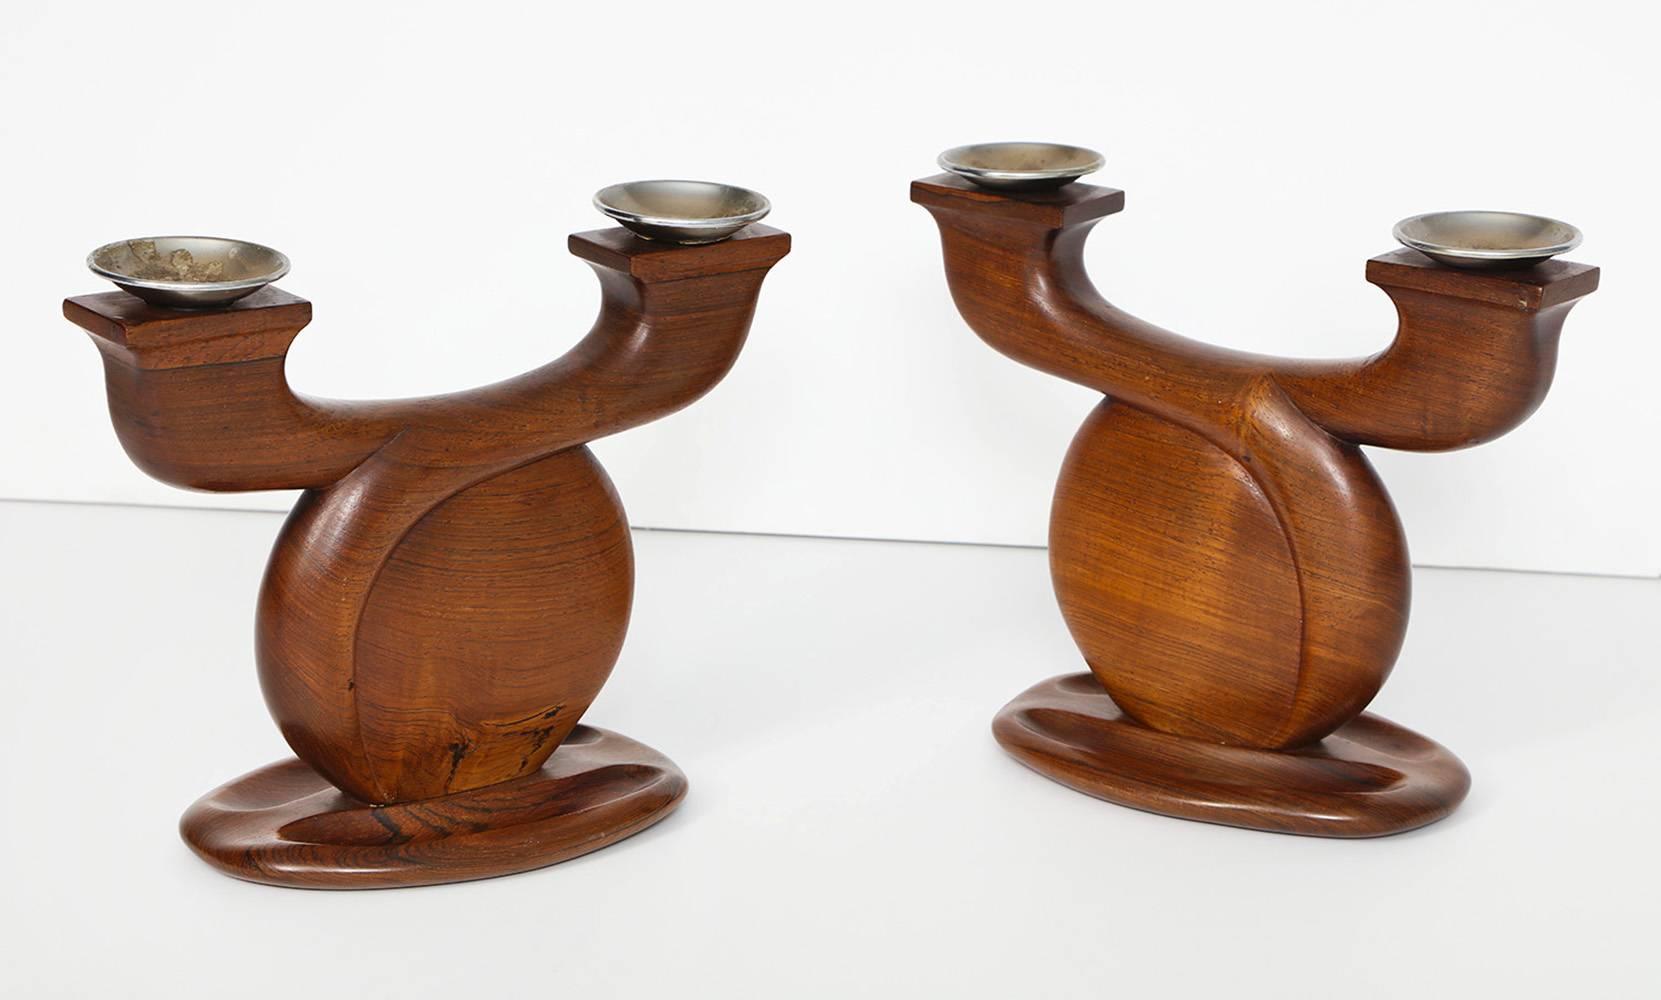 French Pair of Studio-Made Candelabras by Louis Prodhon